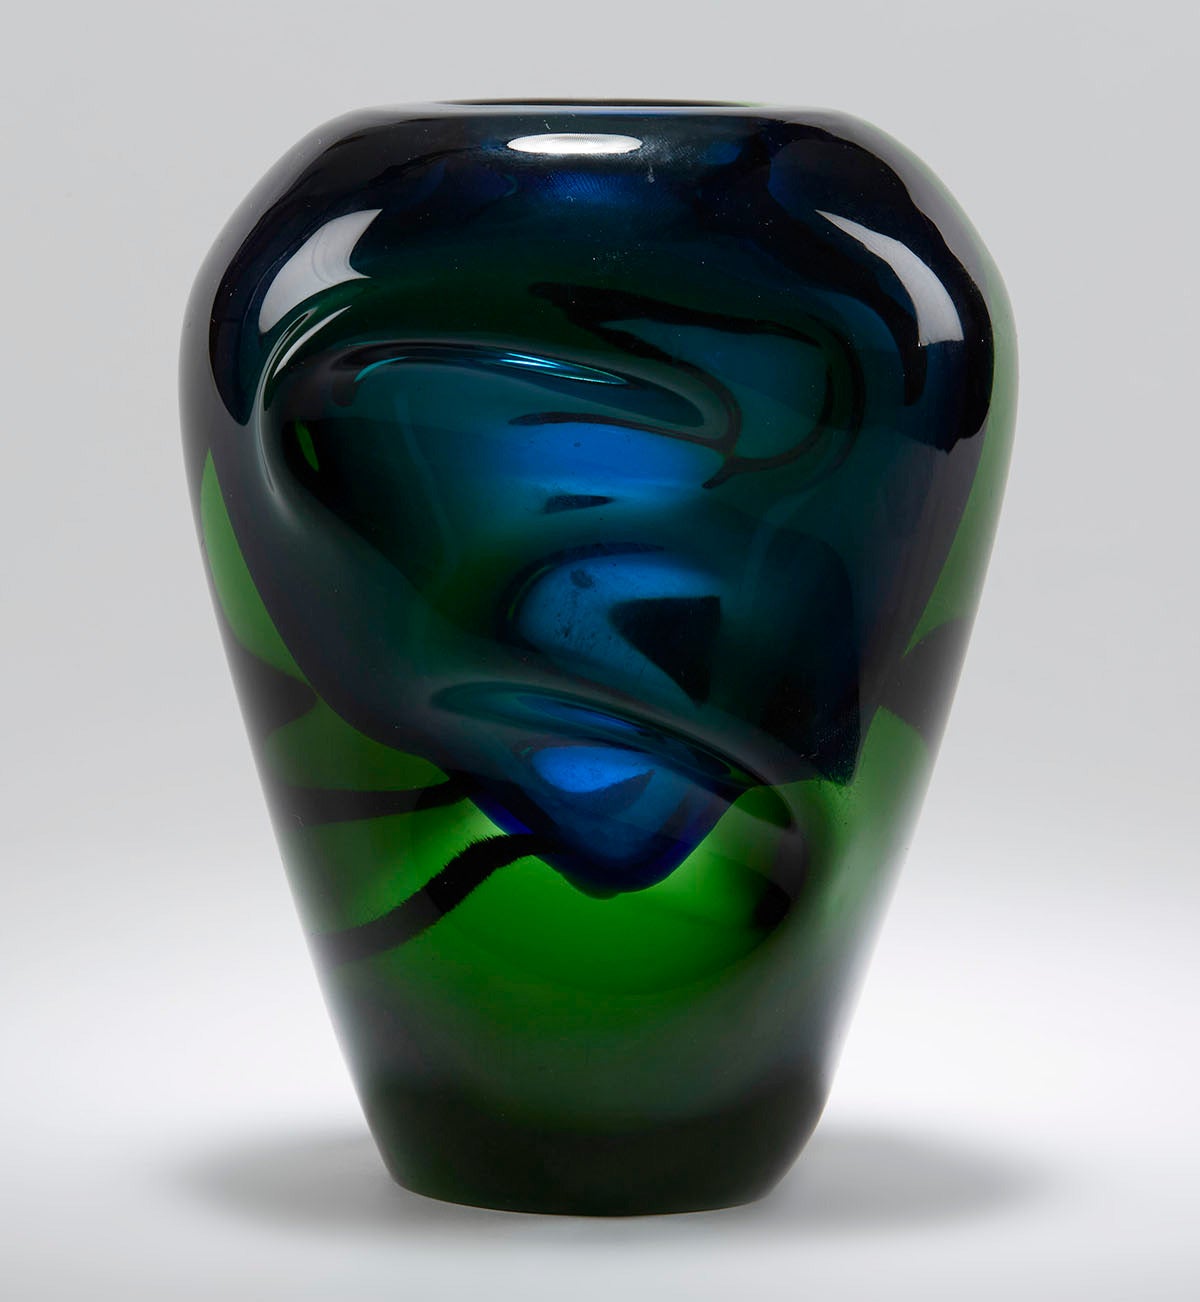 Czech Sommerso art glass vase designed by Jindrich Beraneck for Skrdlovice glass with a blue glass inner vessel cased in heavy green glass with moulded thumb print designs to either side of the body and with a narrow oval shaped opening to the top